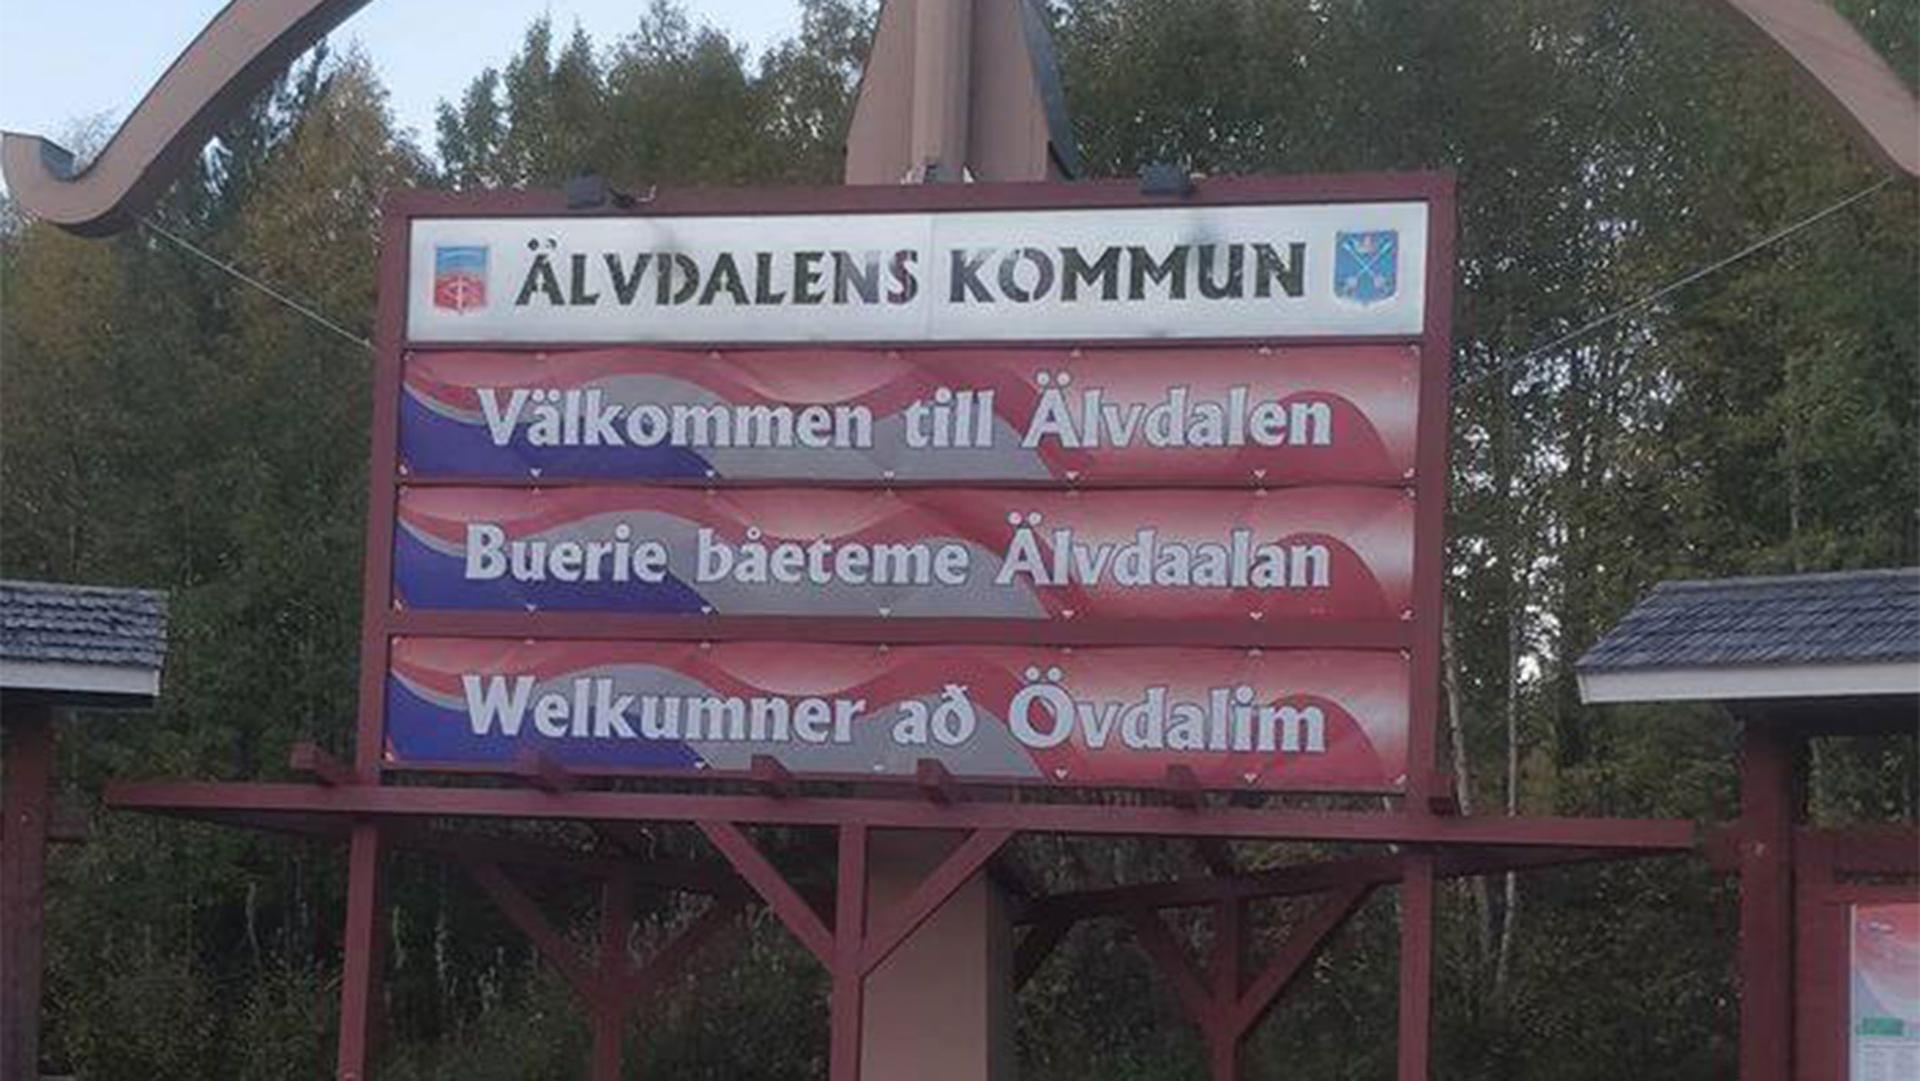 A red and white sign that says "Welcome to Älvdalen" in the language Elfdalian